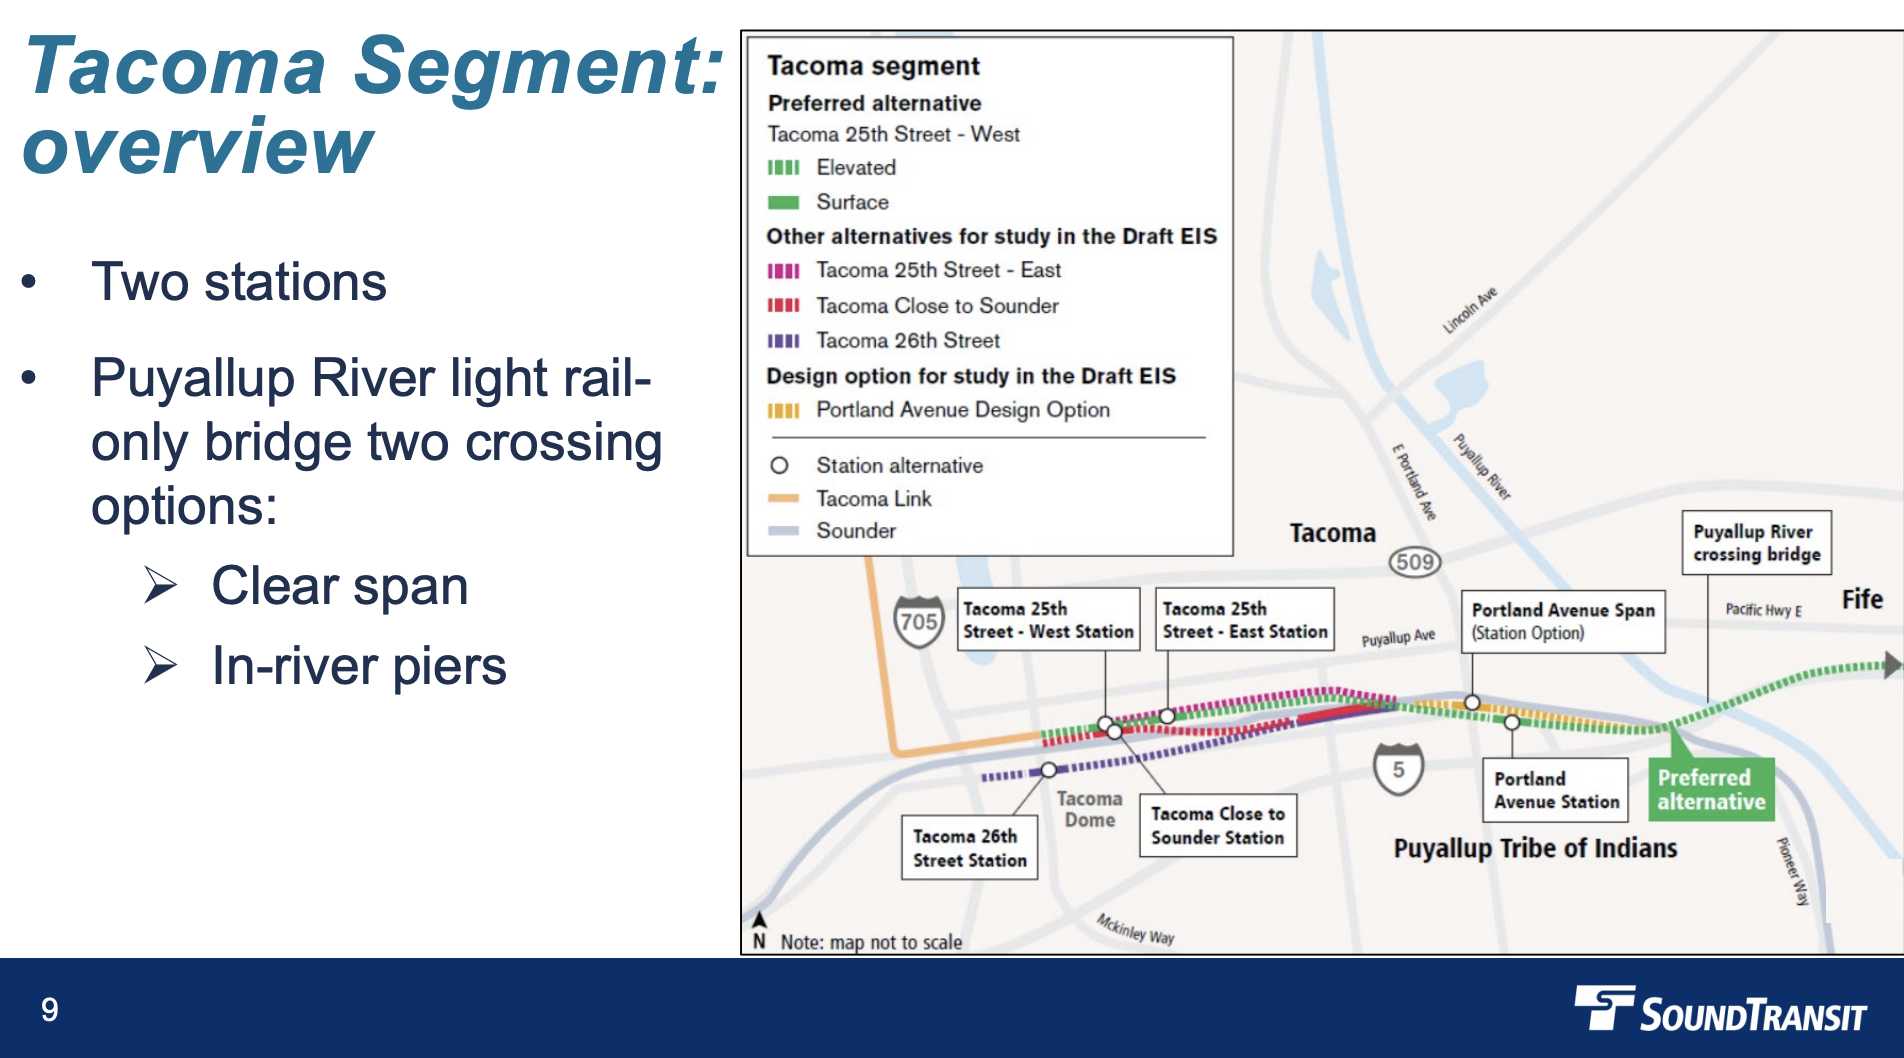 Overview of the Tacoma segment, including station and alignment options. (Sound Transit)